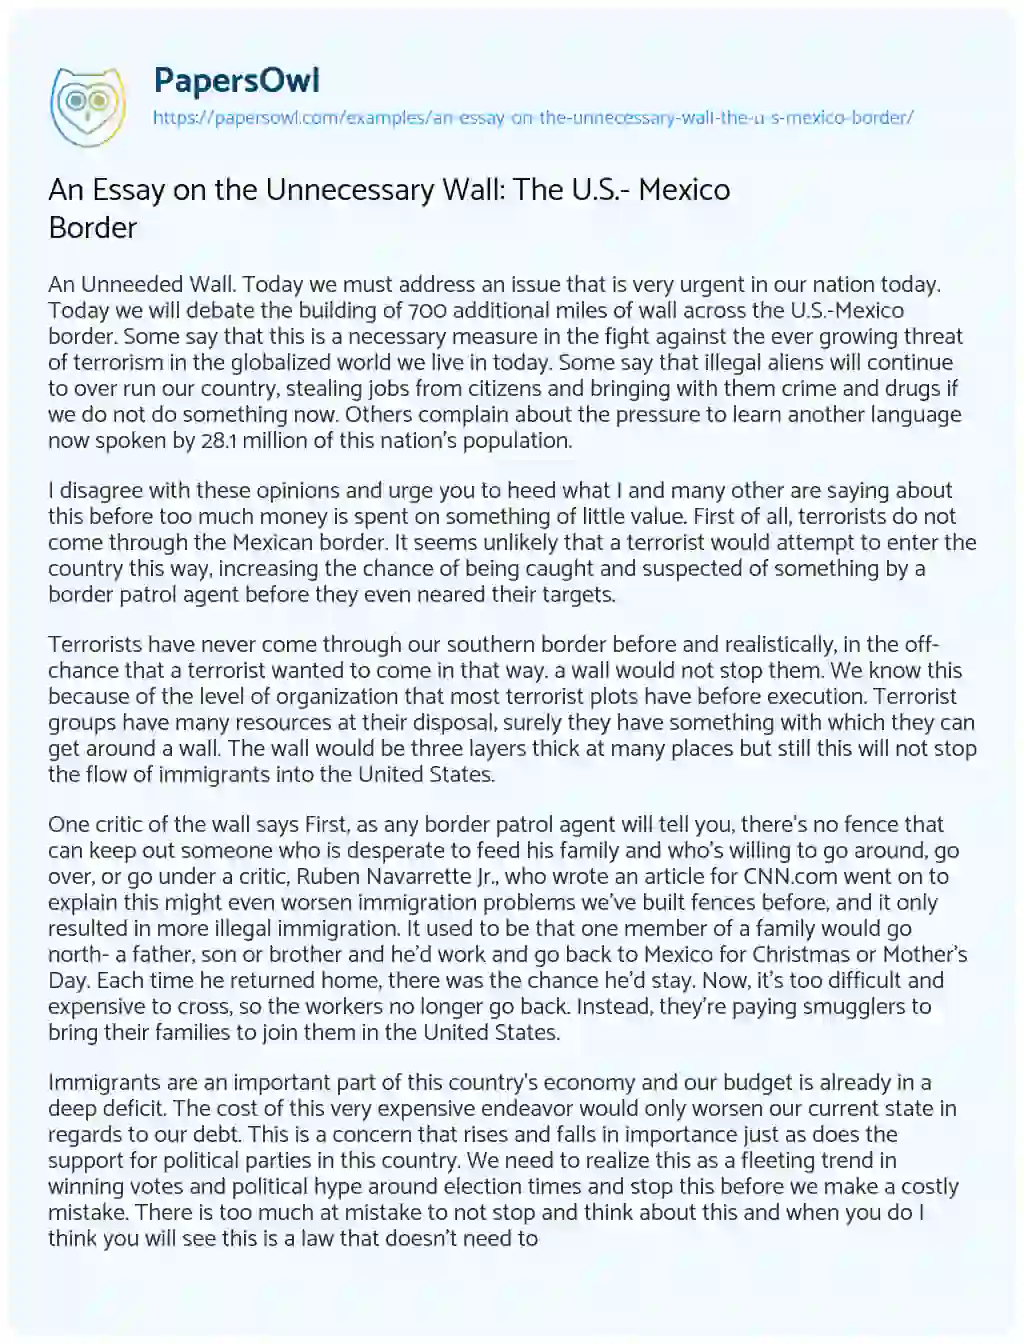 Essay on An Essay on the Unnecessary Wall: the U.S.- Mexico Border